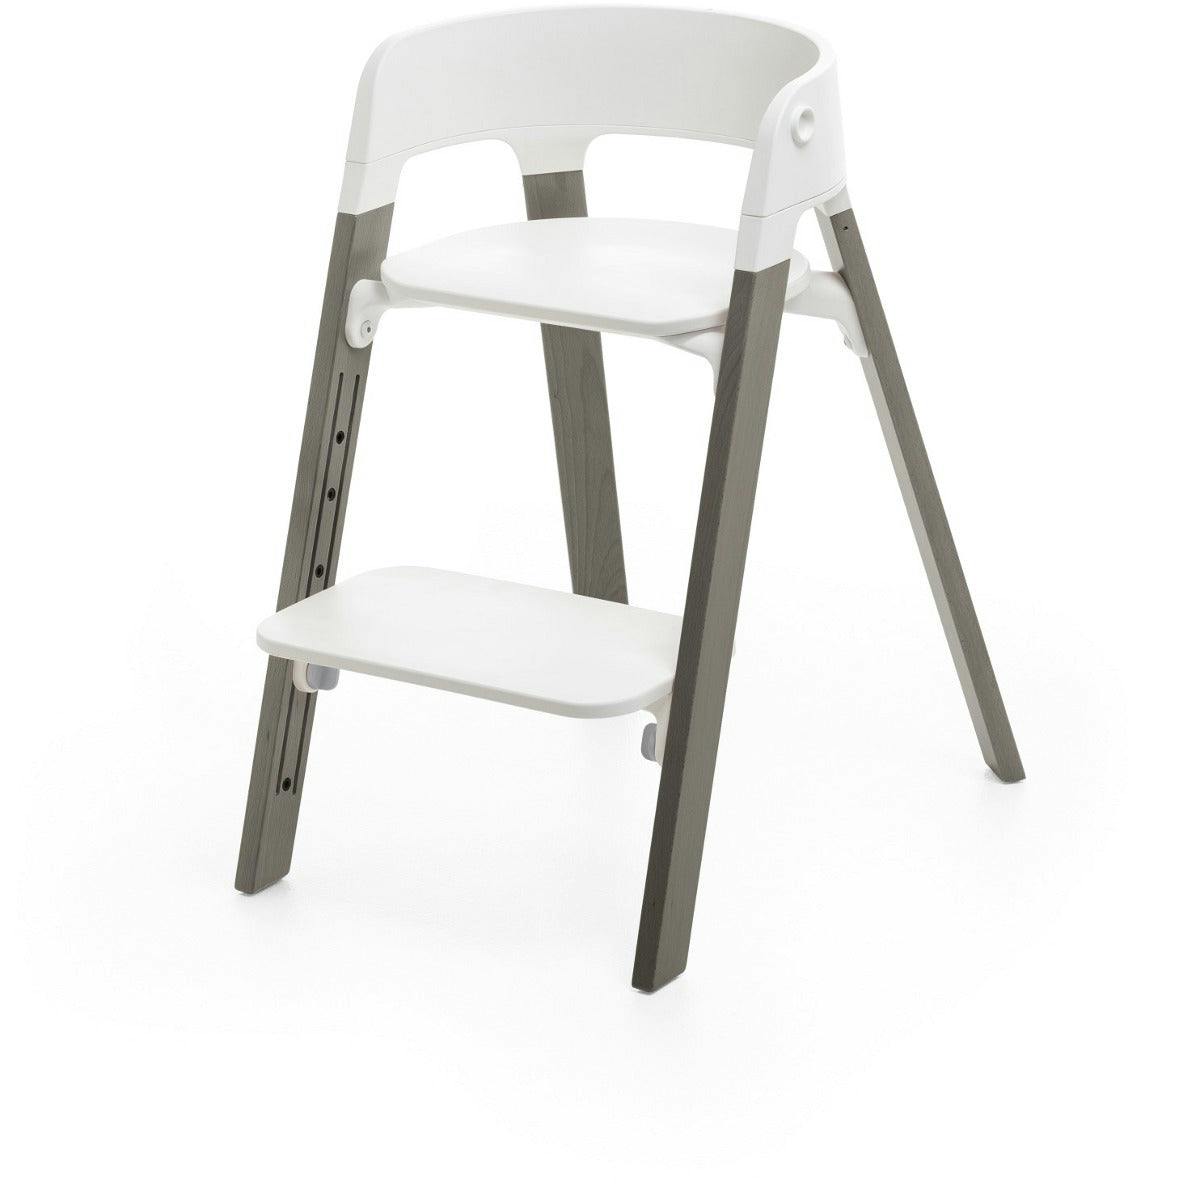 Stokke Steps™ High Chair Complete · Hazy Grey Legs/White Seat